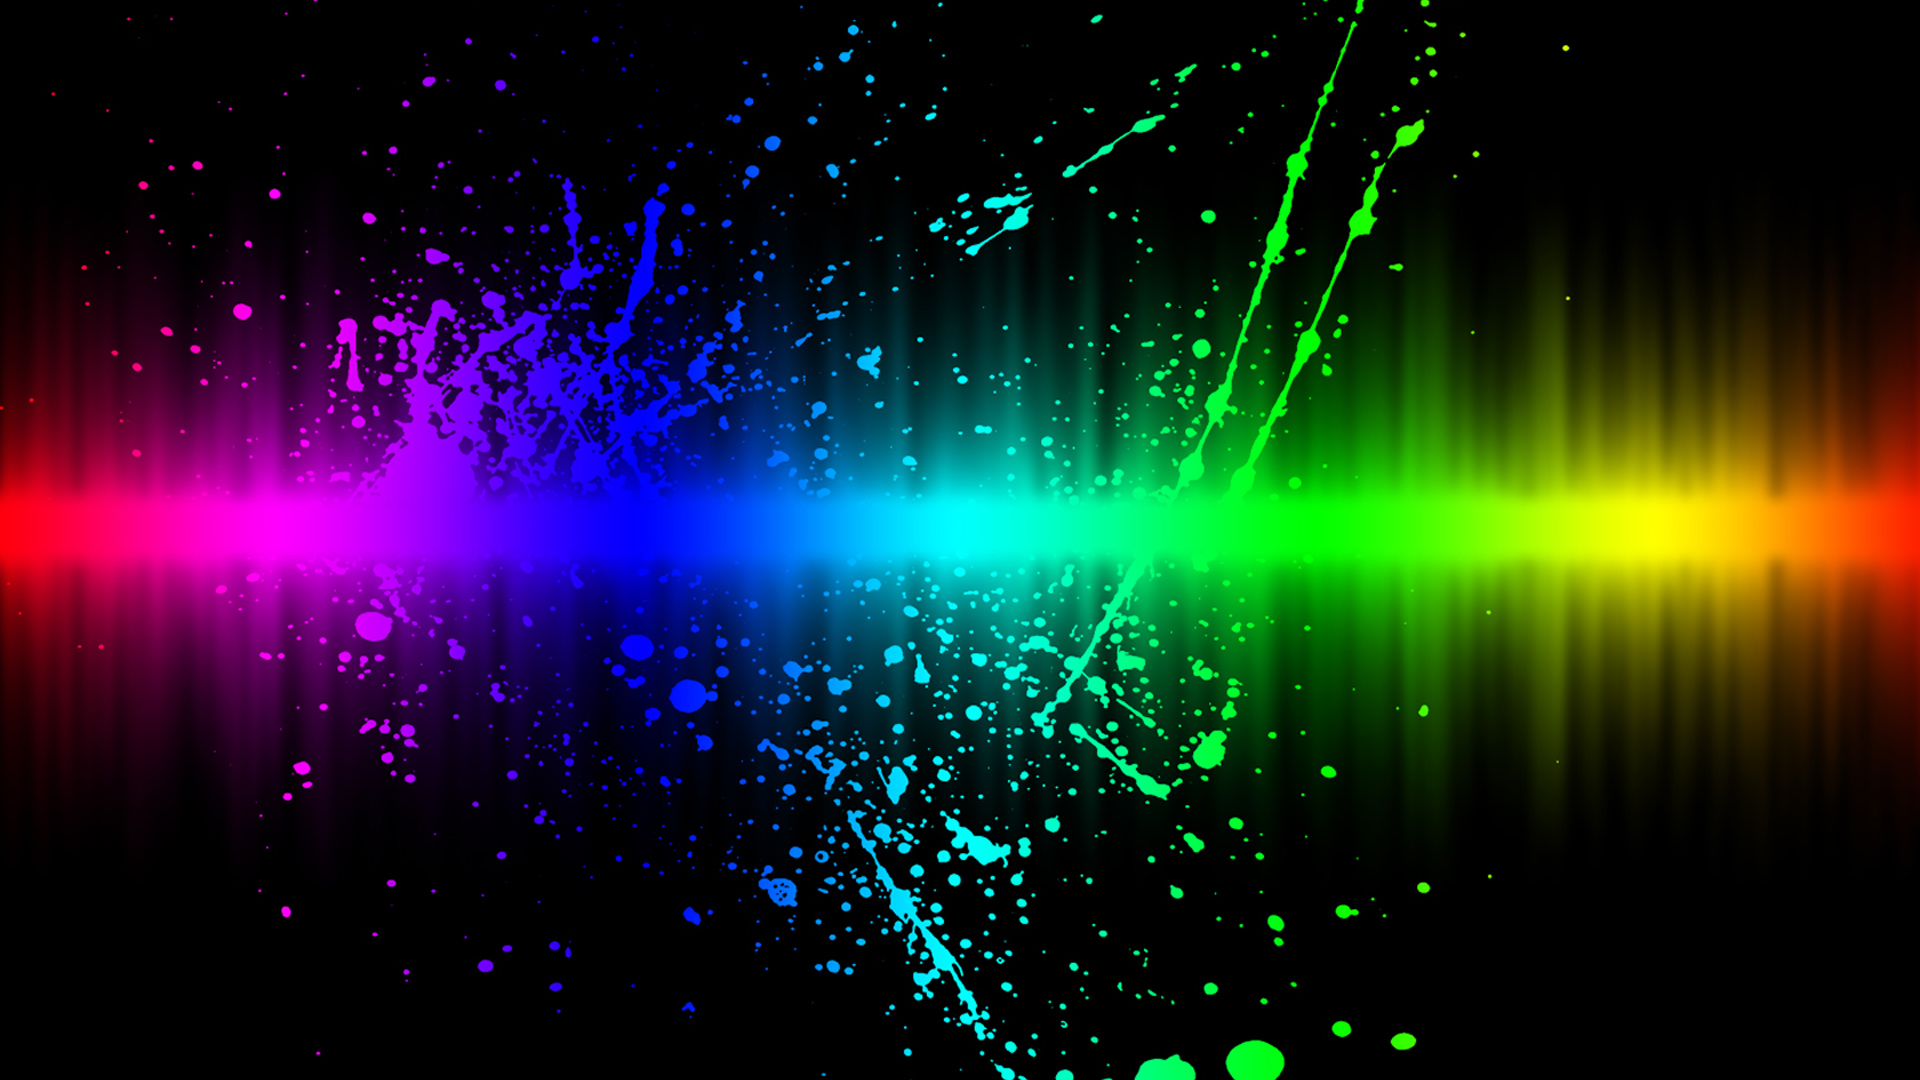 Colorful Backgrounds free download | Wallpapers, Backgrounds ...